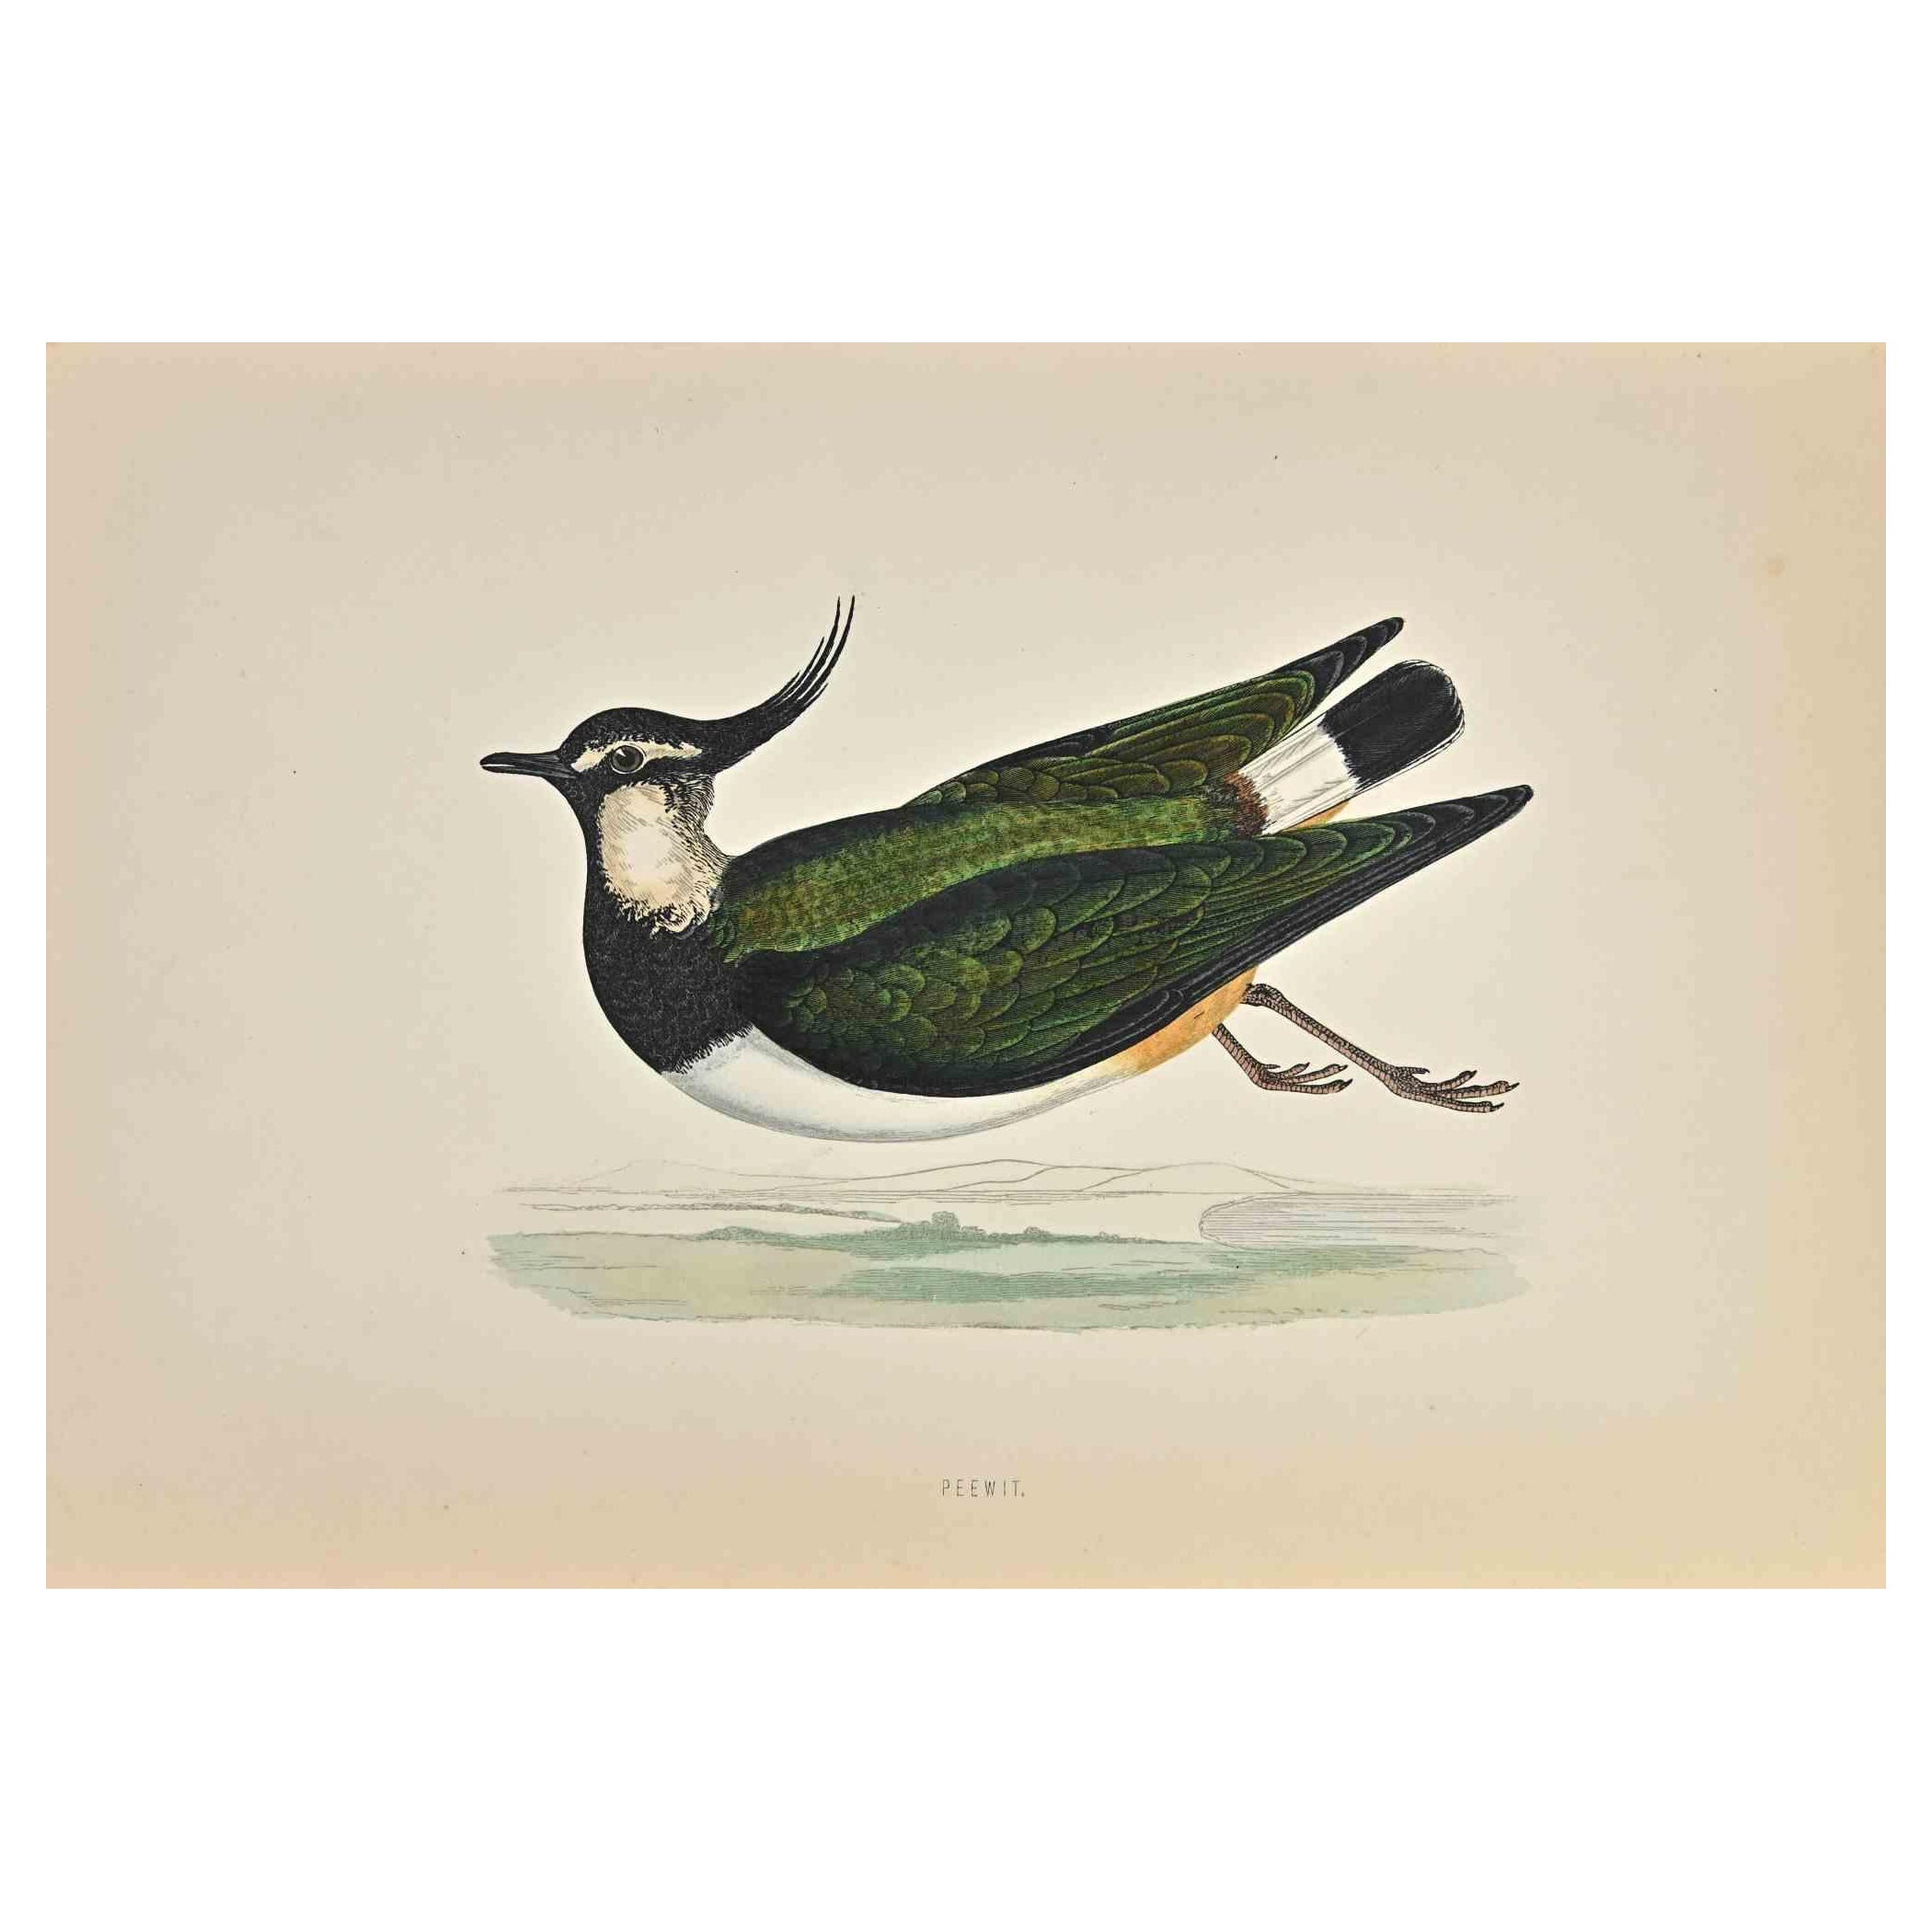 Peewit is  a modern artwork realized in 1870 by the British artist Alexander Francis Lydon (1836-1917) . 

Woodcut print, hand colored, published by London, Bell & Sons, 1870.  Name of the bird printed in plate. This work is part of a print suite